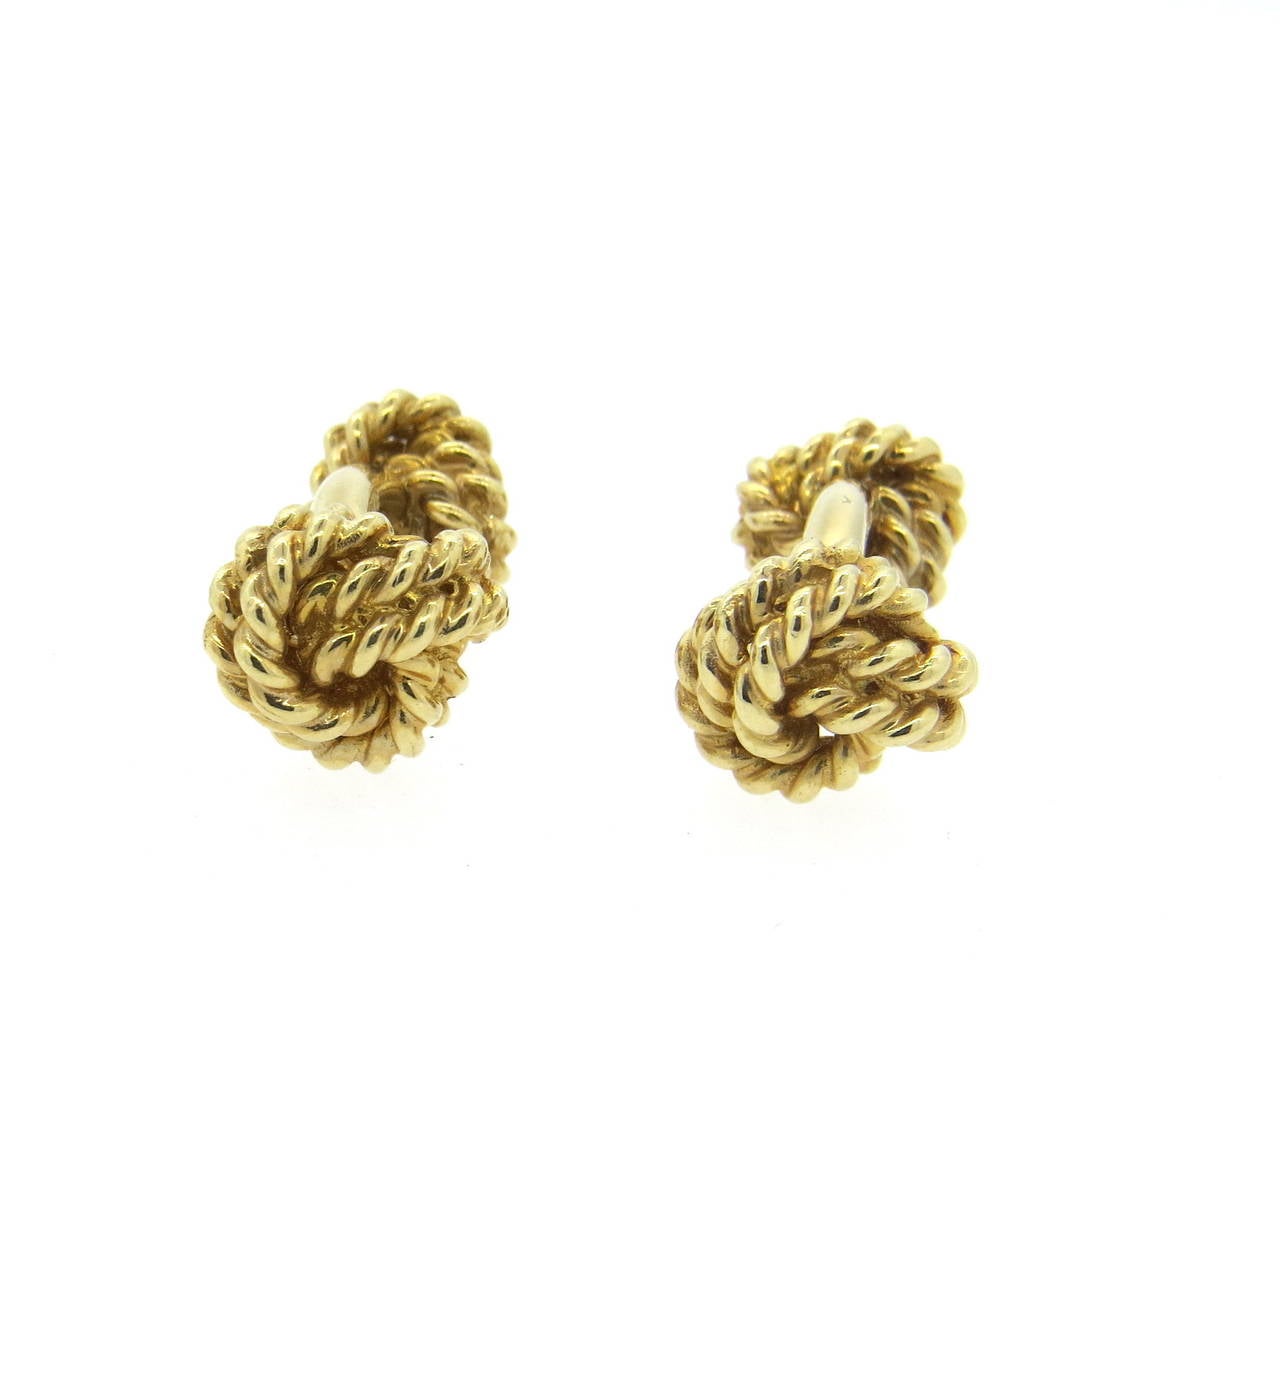 Vintage 14k gold woven knot cufflinks, crafted by Tiffany & Co. Top measures 12.5mm x 13mm, back - 10.5mm x 10.5mm. Marked 14k and Tiffany & Co. Weight - 16.3 grams
Come in Tiffany & Co box.